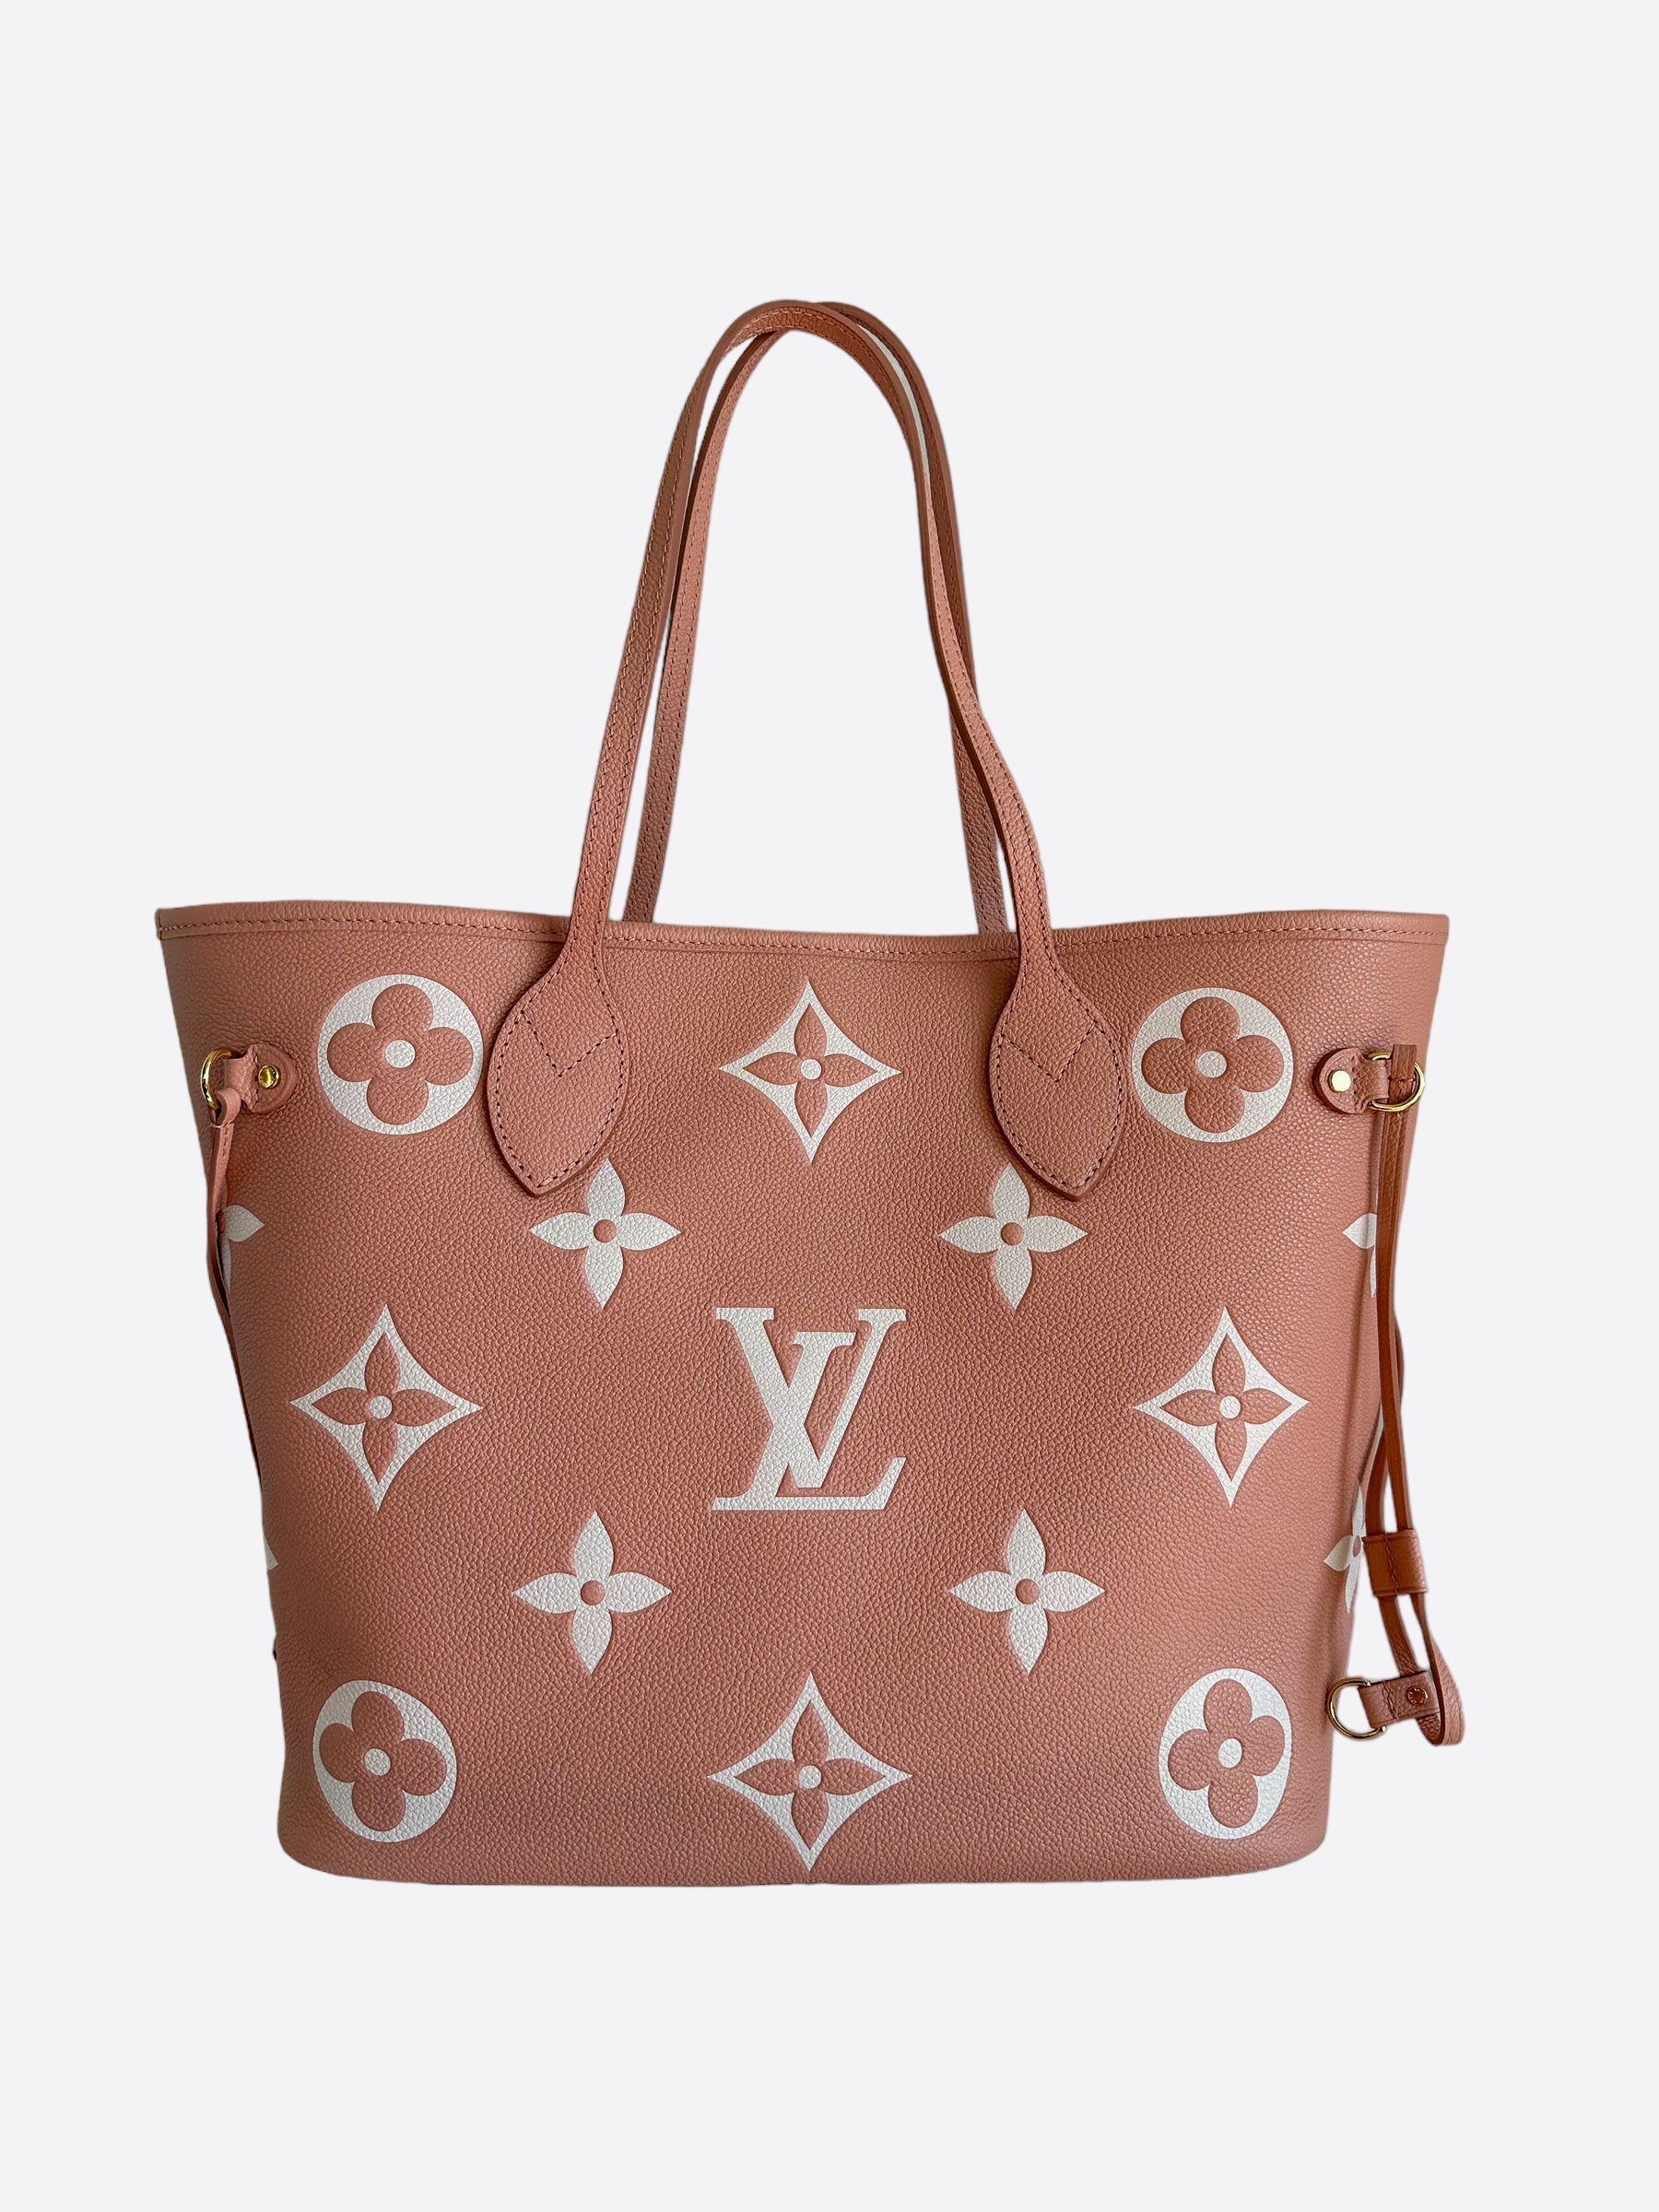 Louis Vuitton lv neverfull shopping bag monogram with hot pink interior MM  size